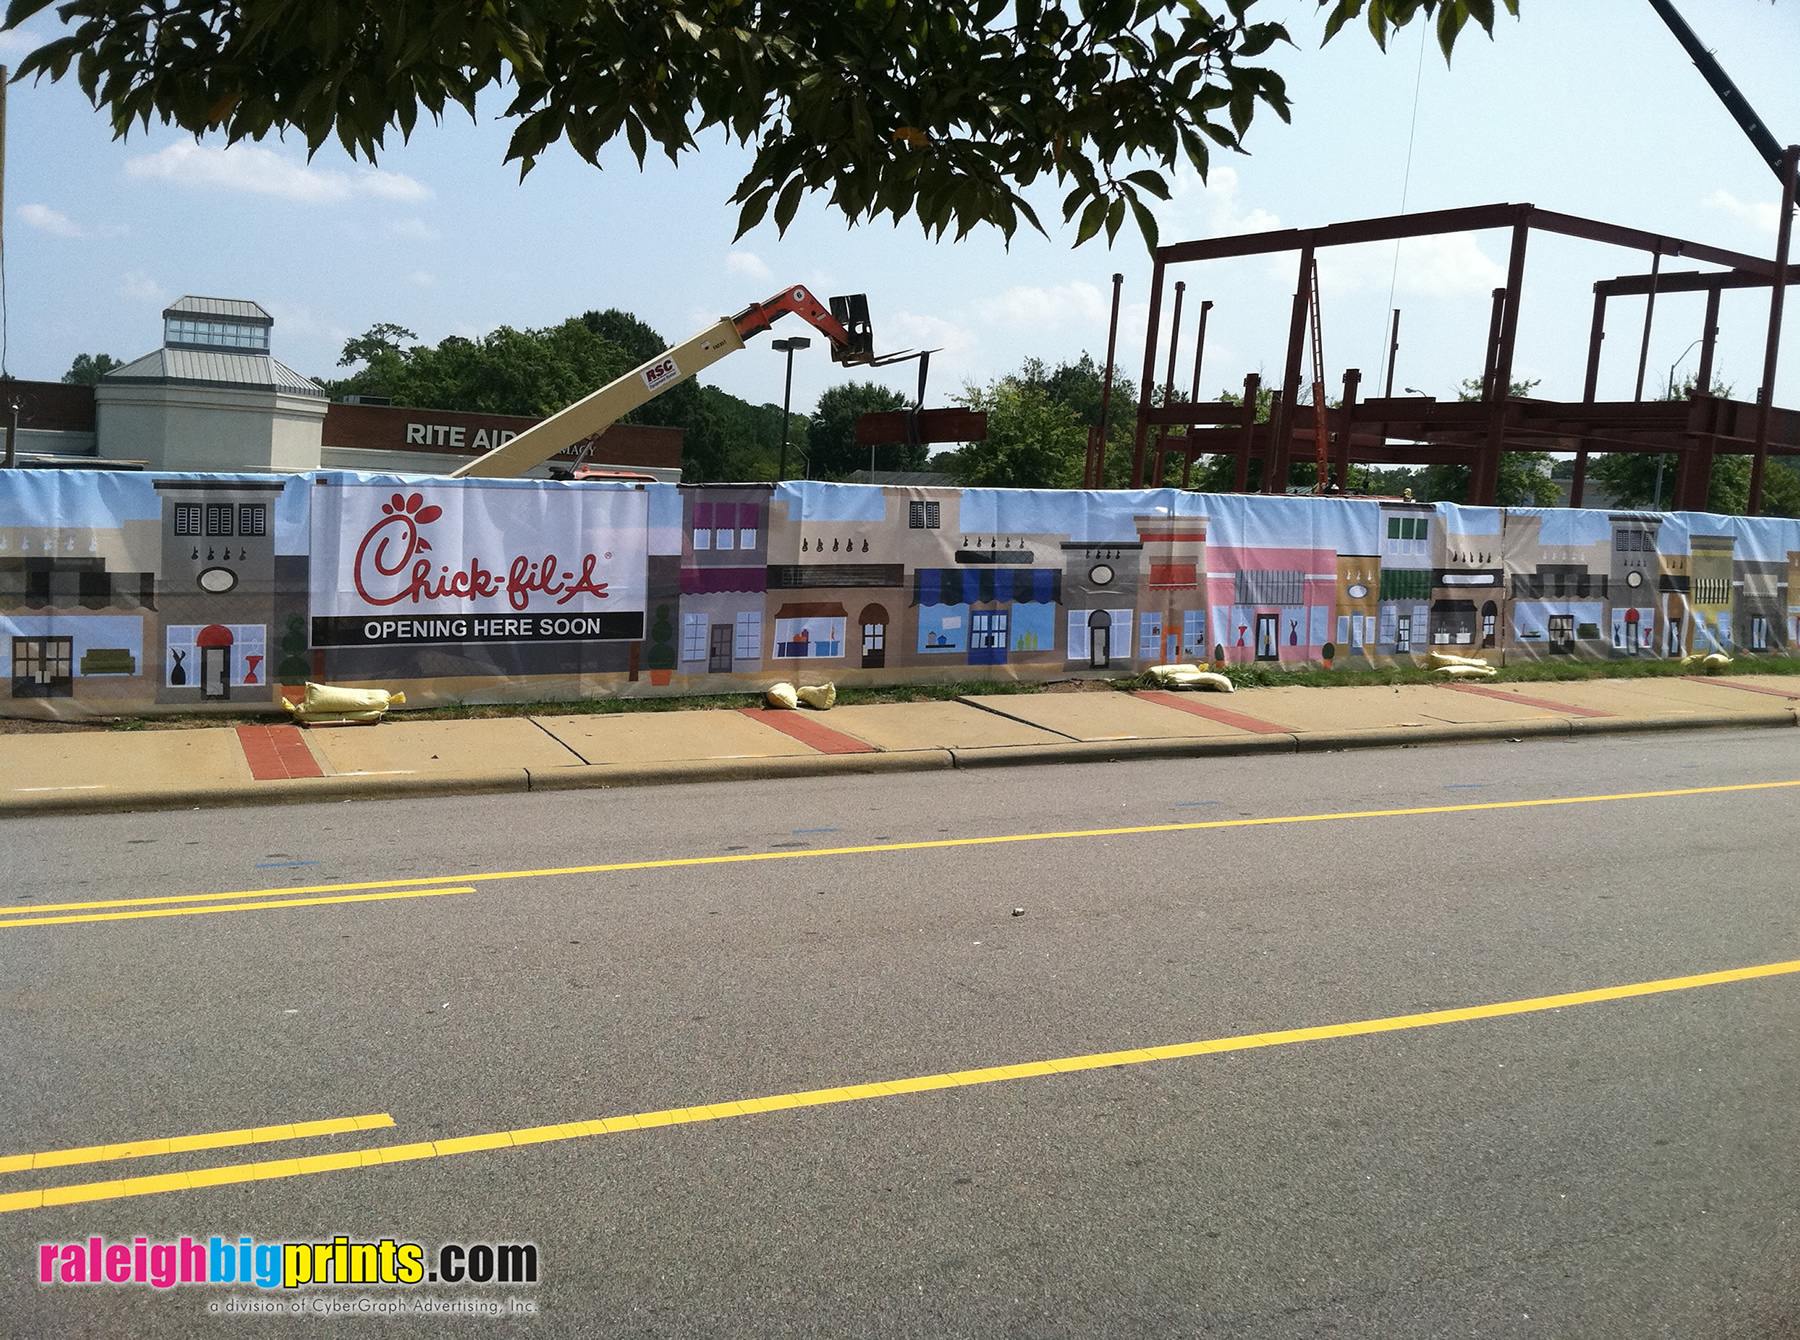 Construction Fence Mesh Banner - Raleigh Big Prints - Cameron Village Chick-fil-A